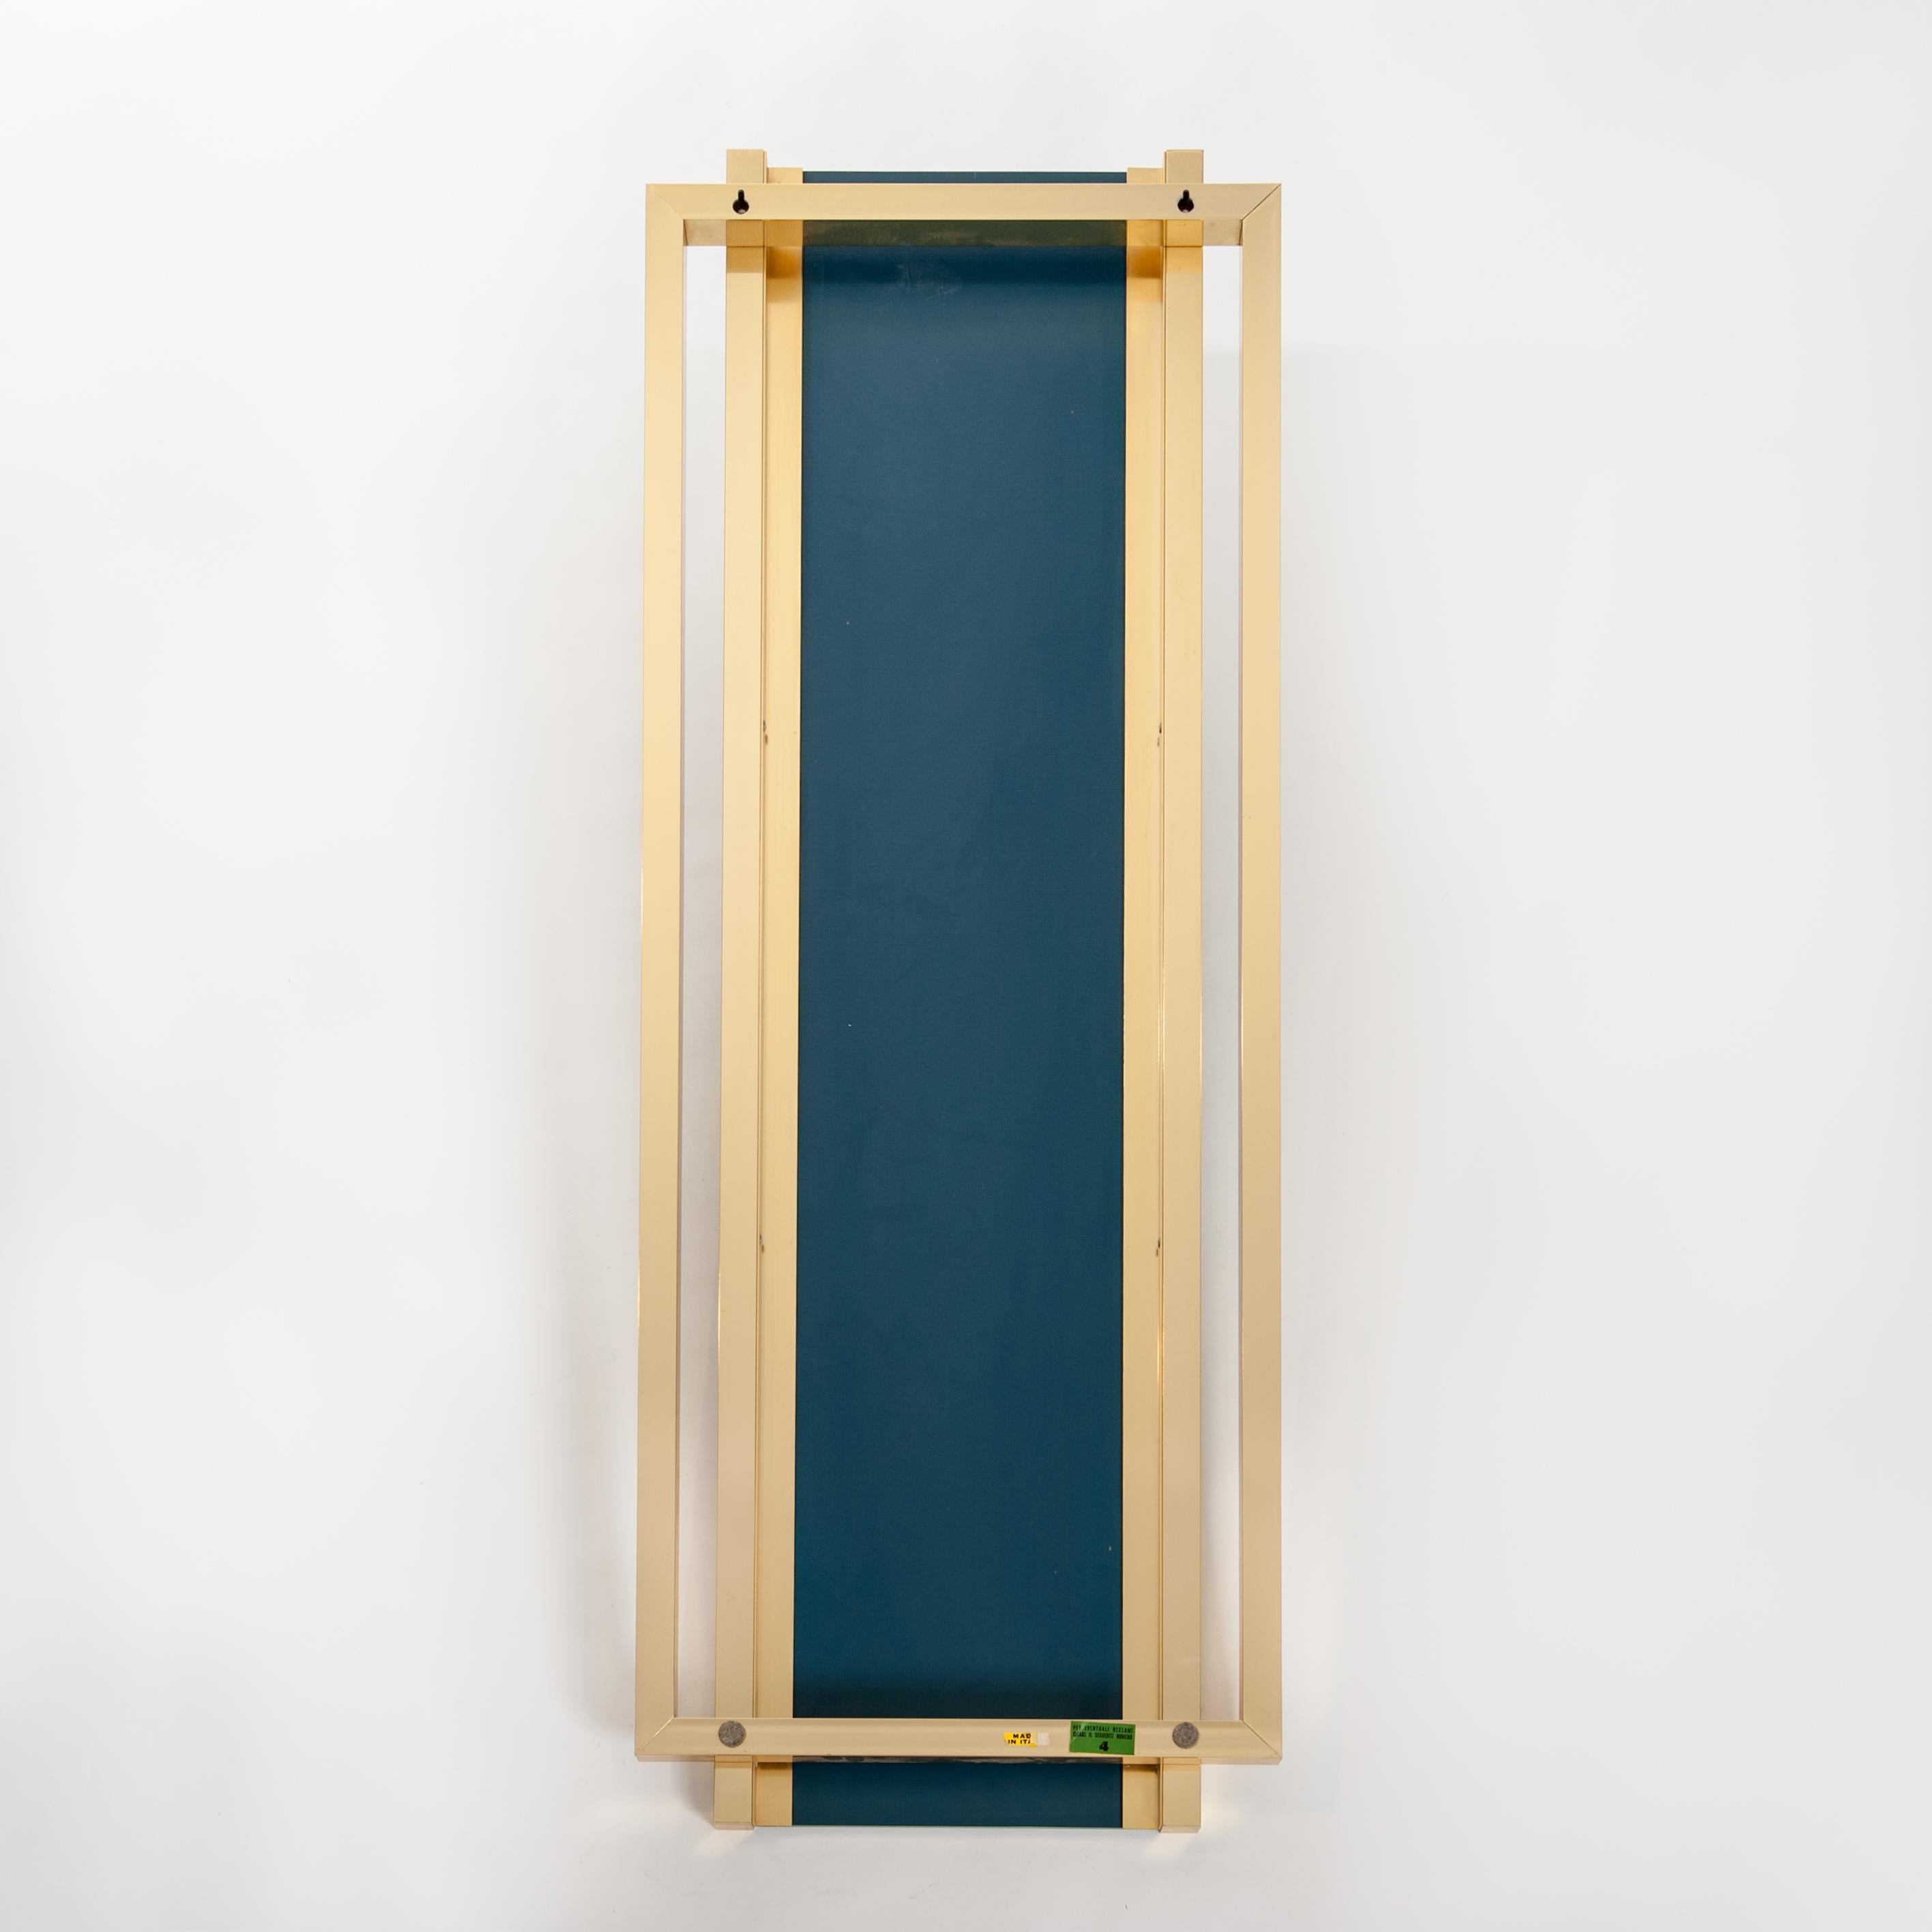 Hand-Crafted Italian Modern Brass Mirror by Willy Rizzo for Mario Sabot